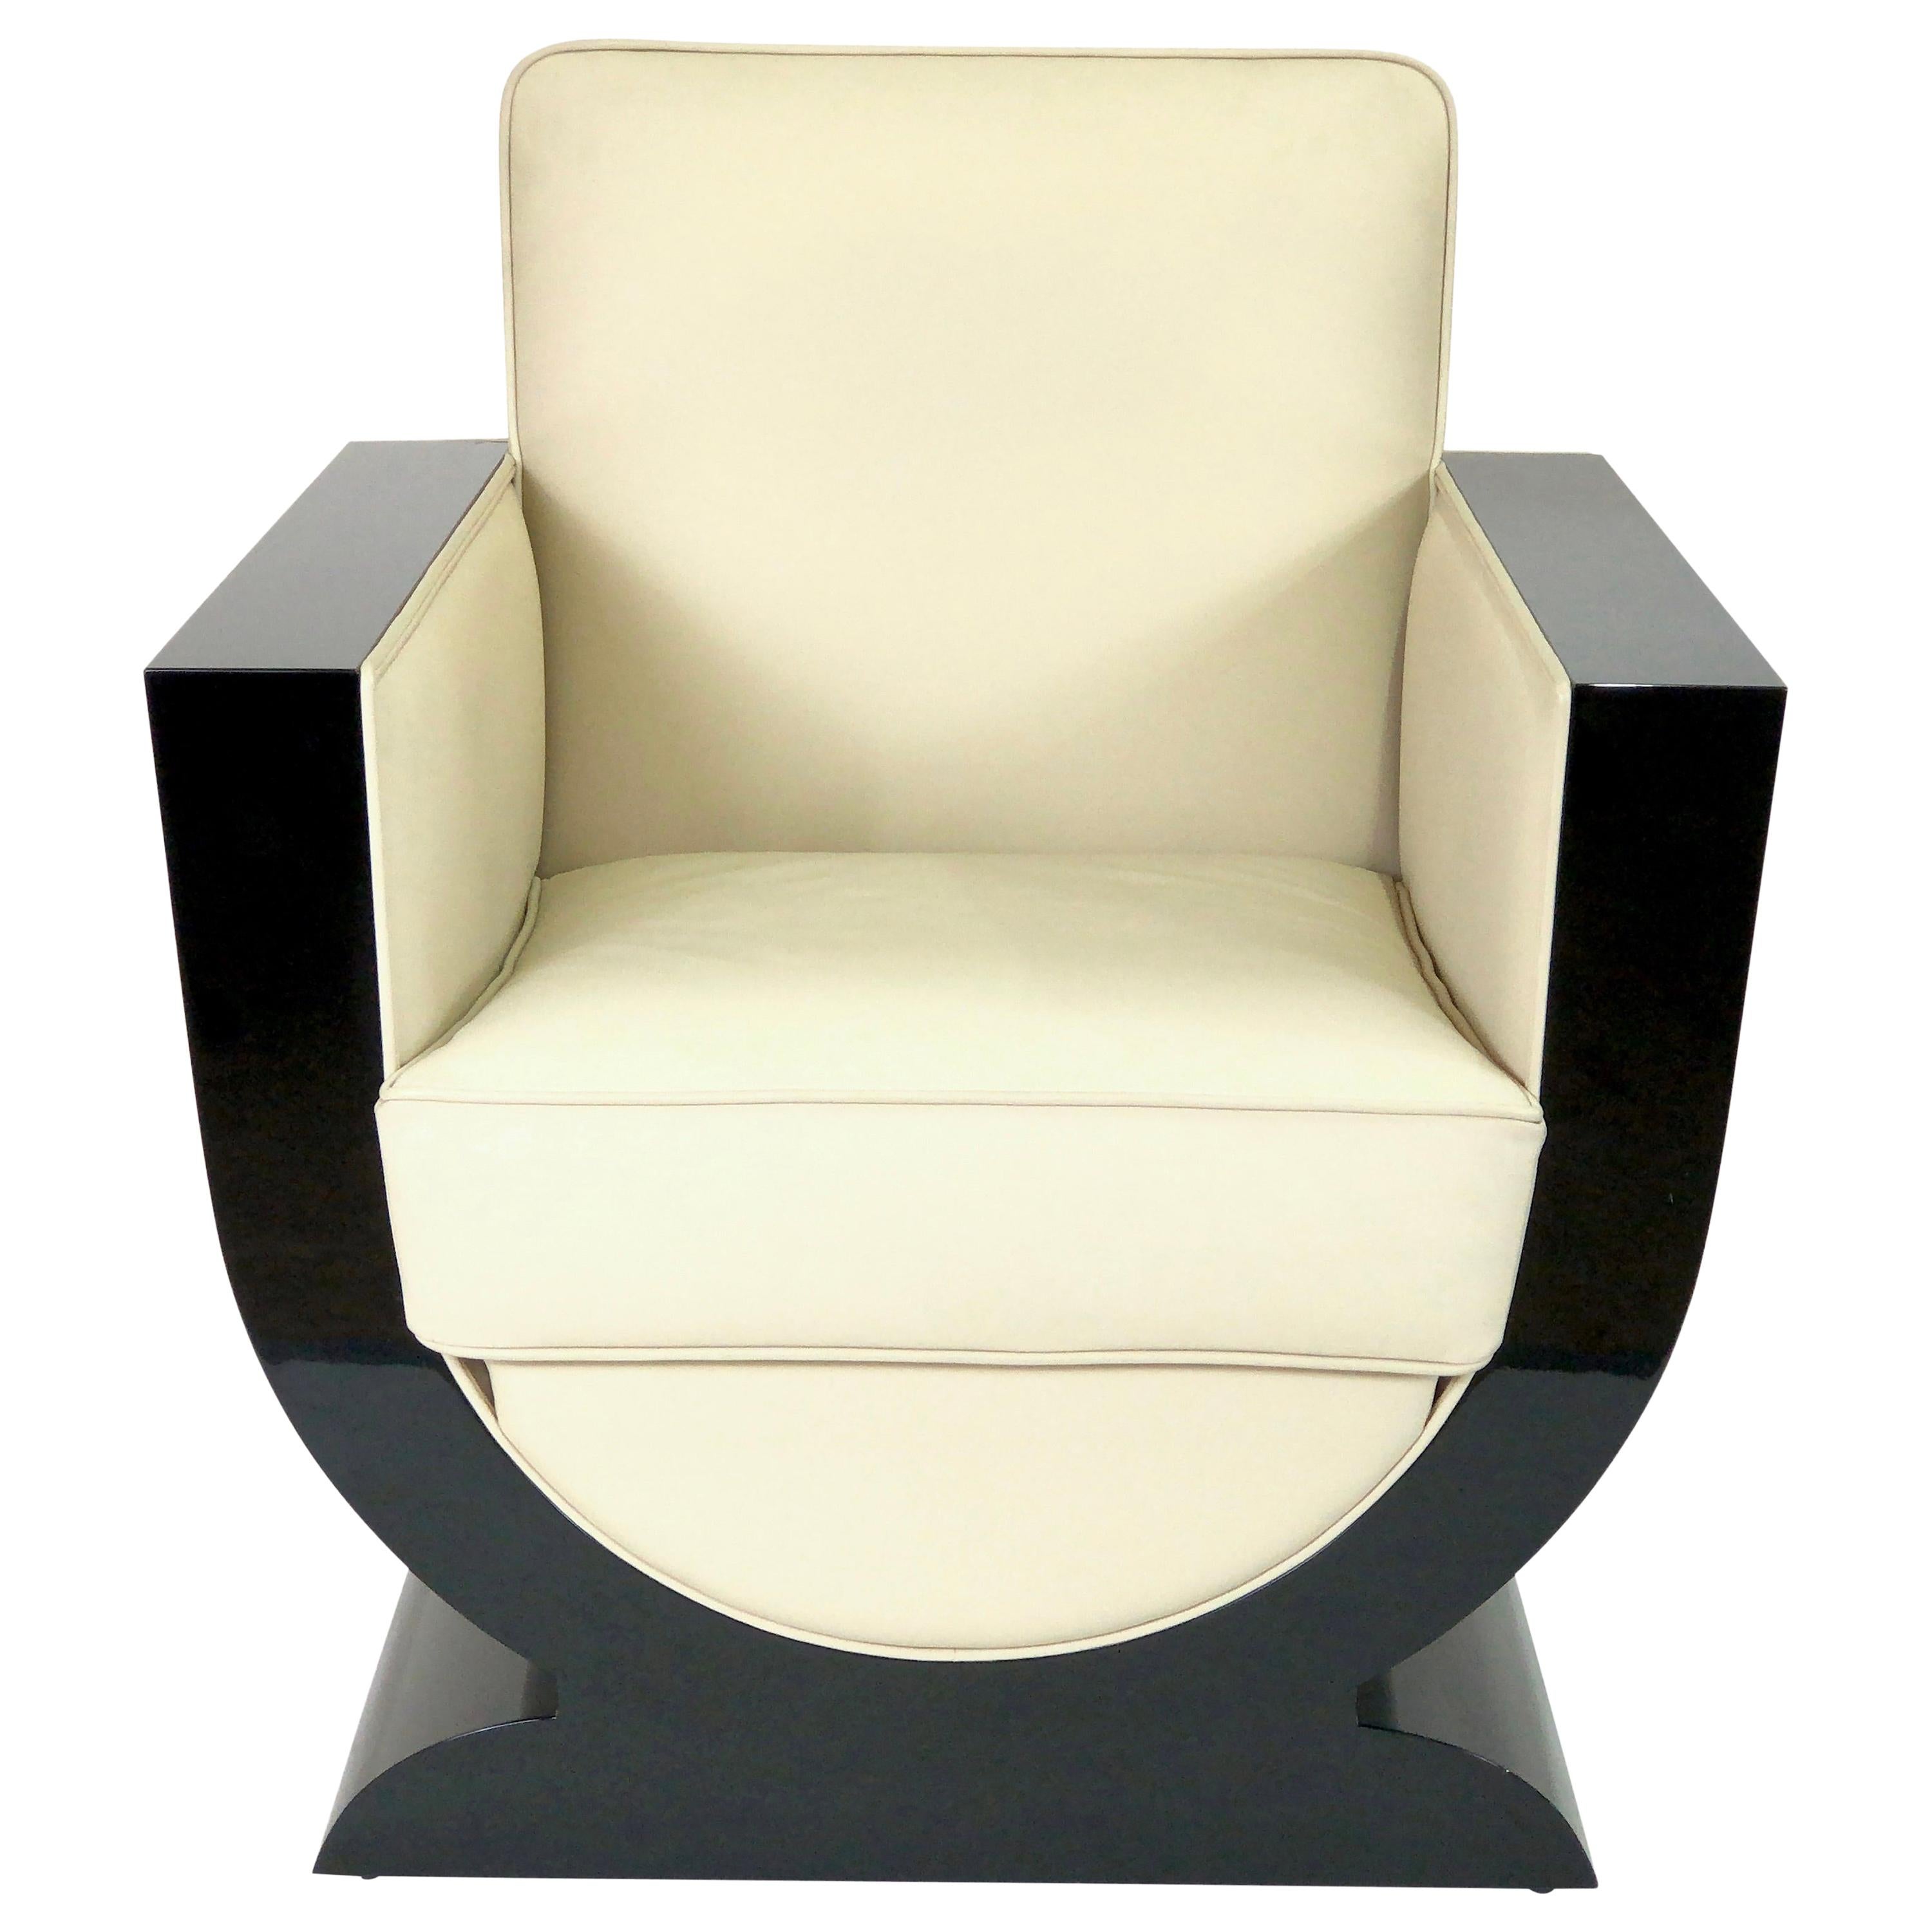 U-Shaped Black and White Art Deco Style Club Chair with Black Piano Lacquer